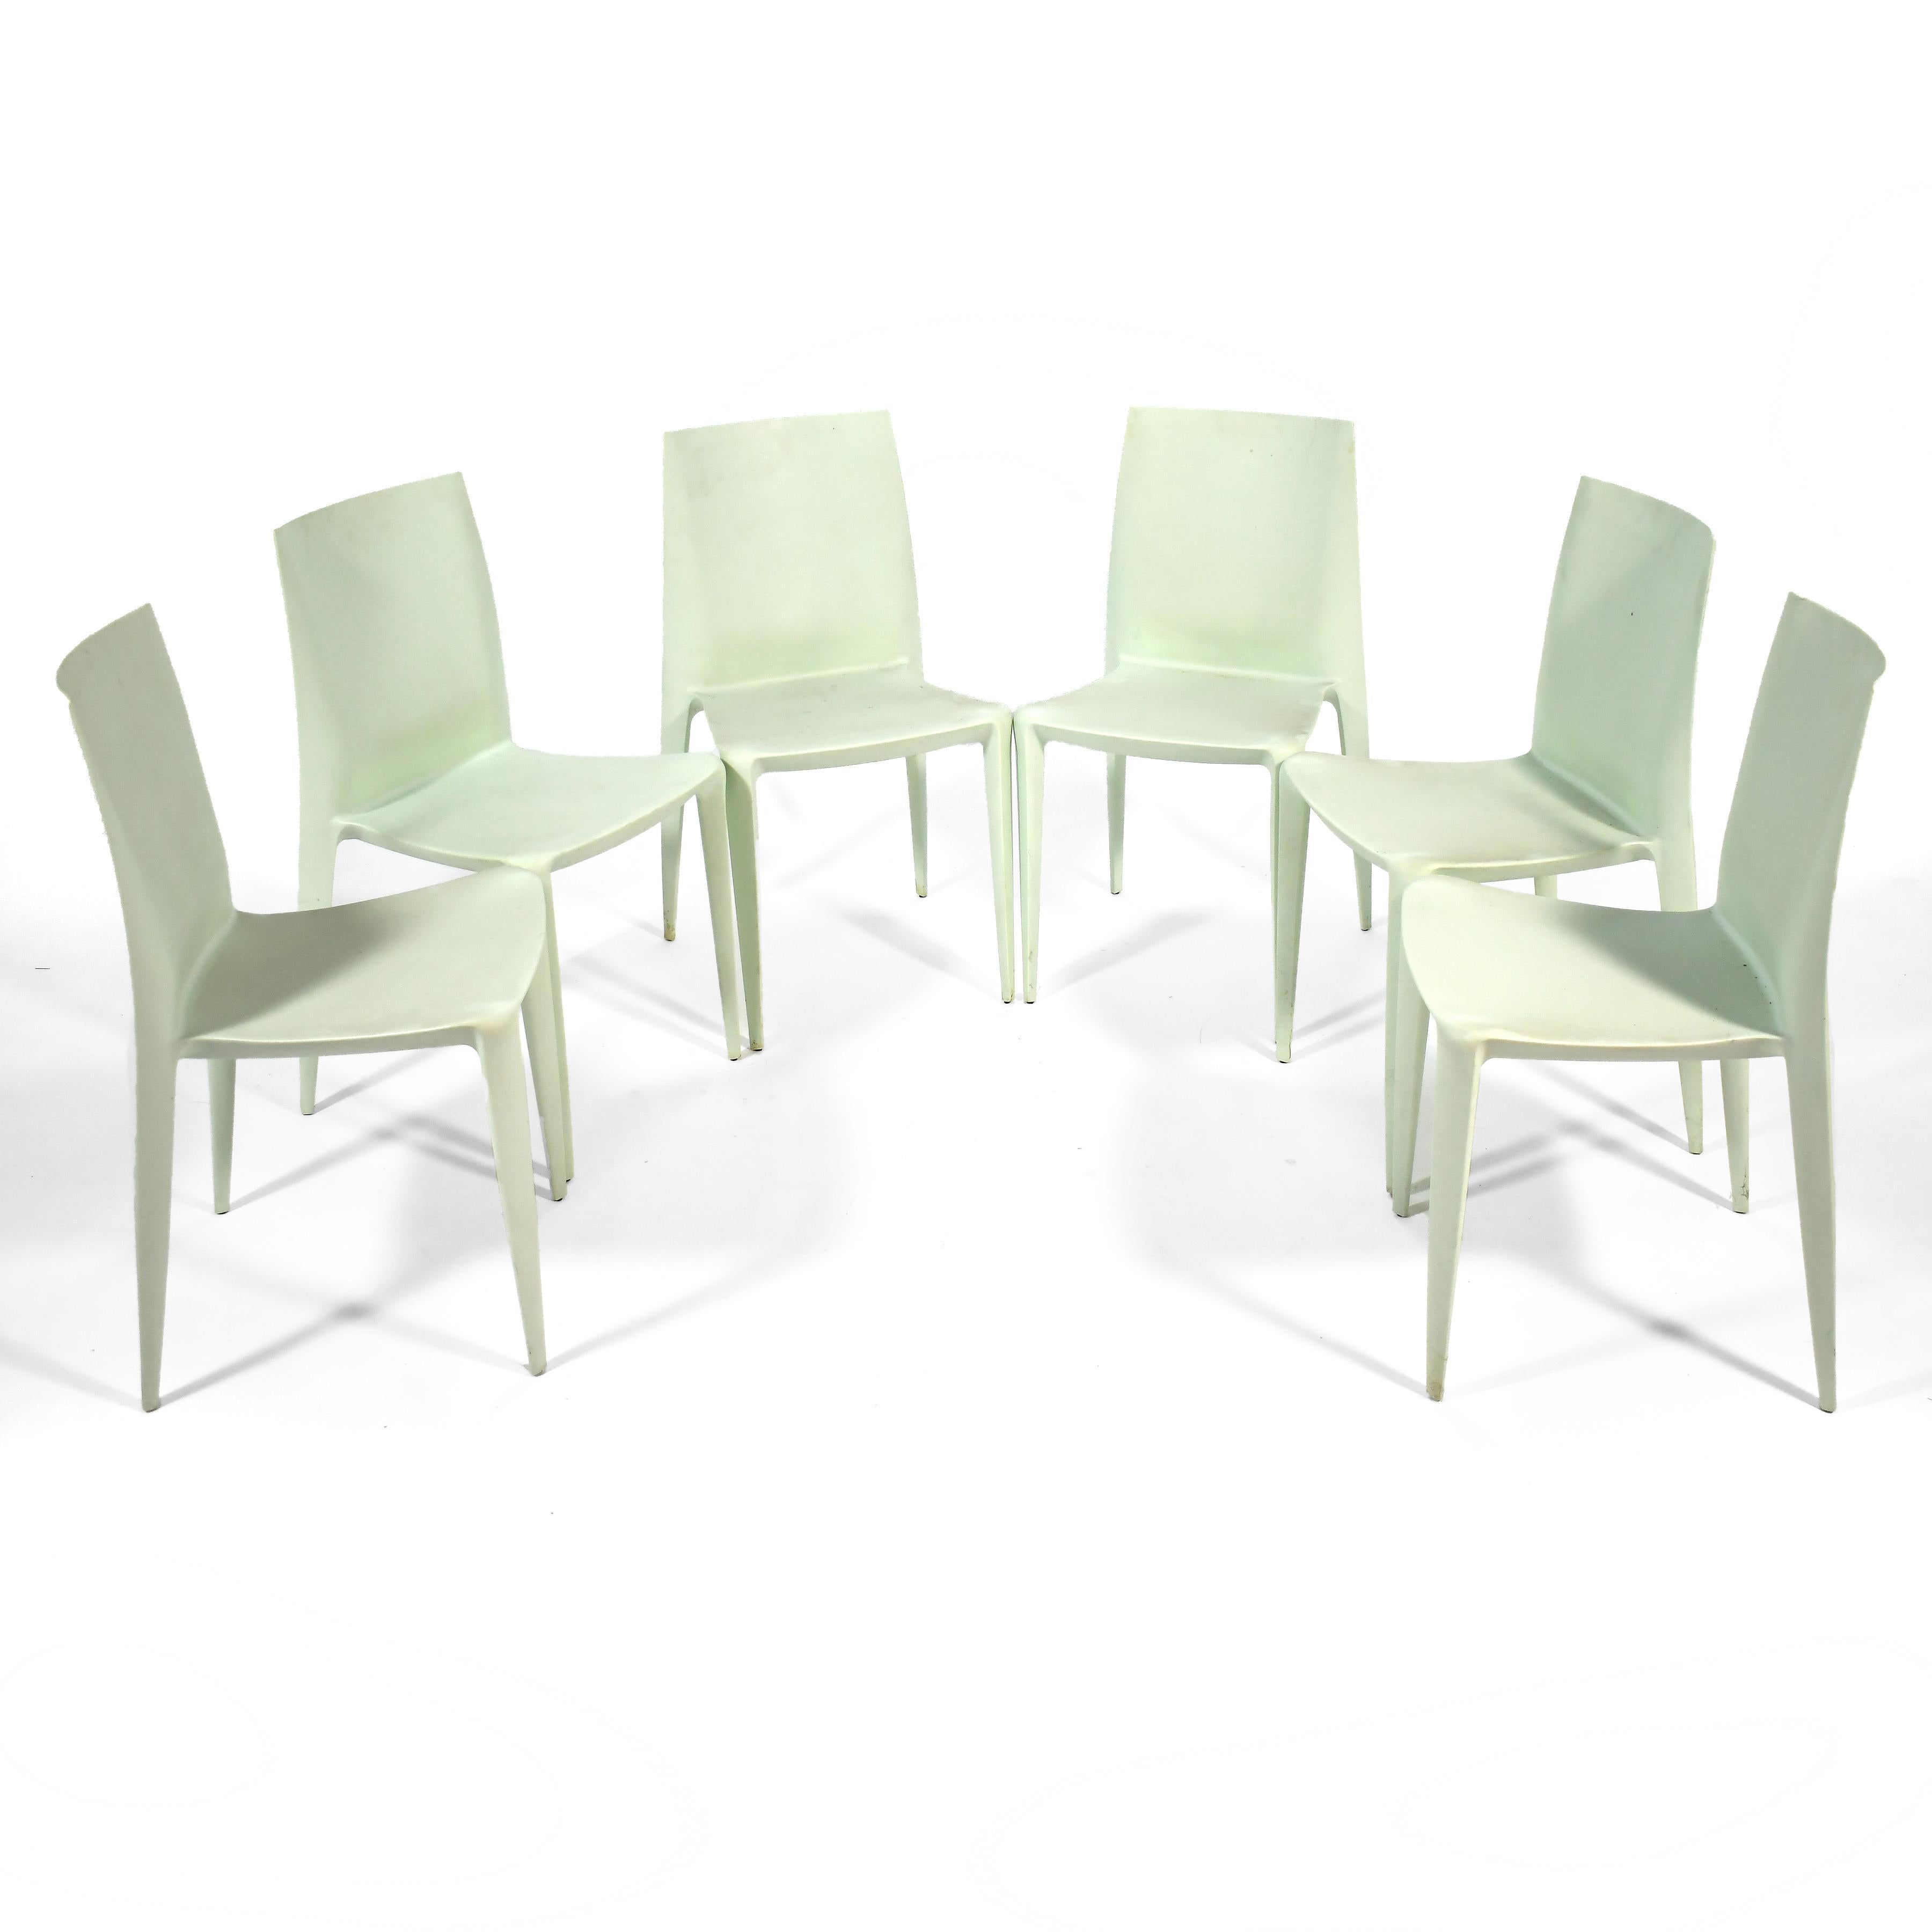 The Heller Bellini chair was designed in 1998 and was a Compasso d’Oro award winner in 2001 for it's innovative design and engineering. Lightweight, strong, stackable, with a flexible back its fiberglass reinforced polypropylene construction makes